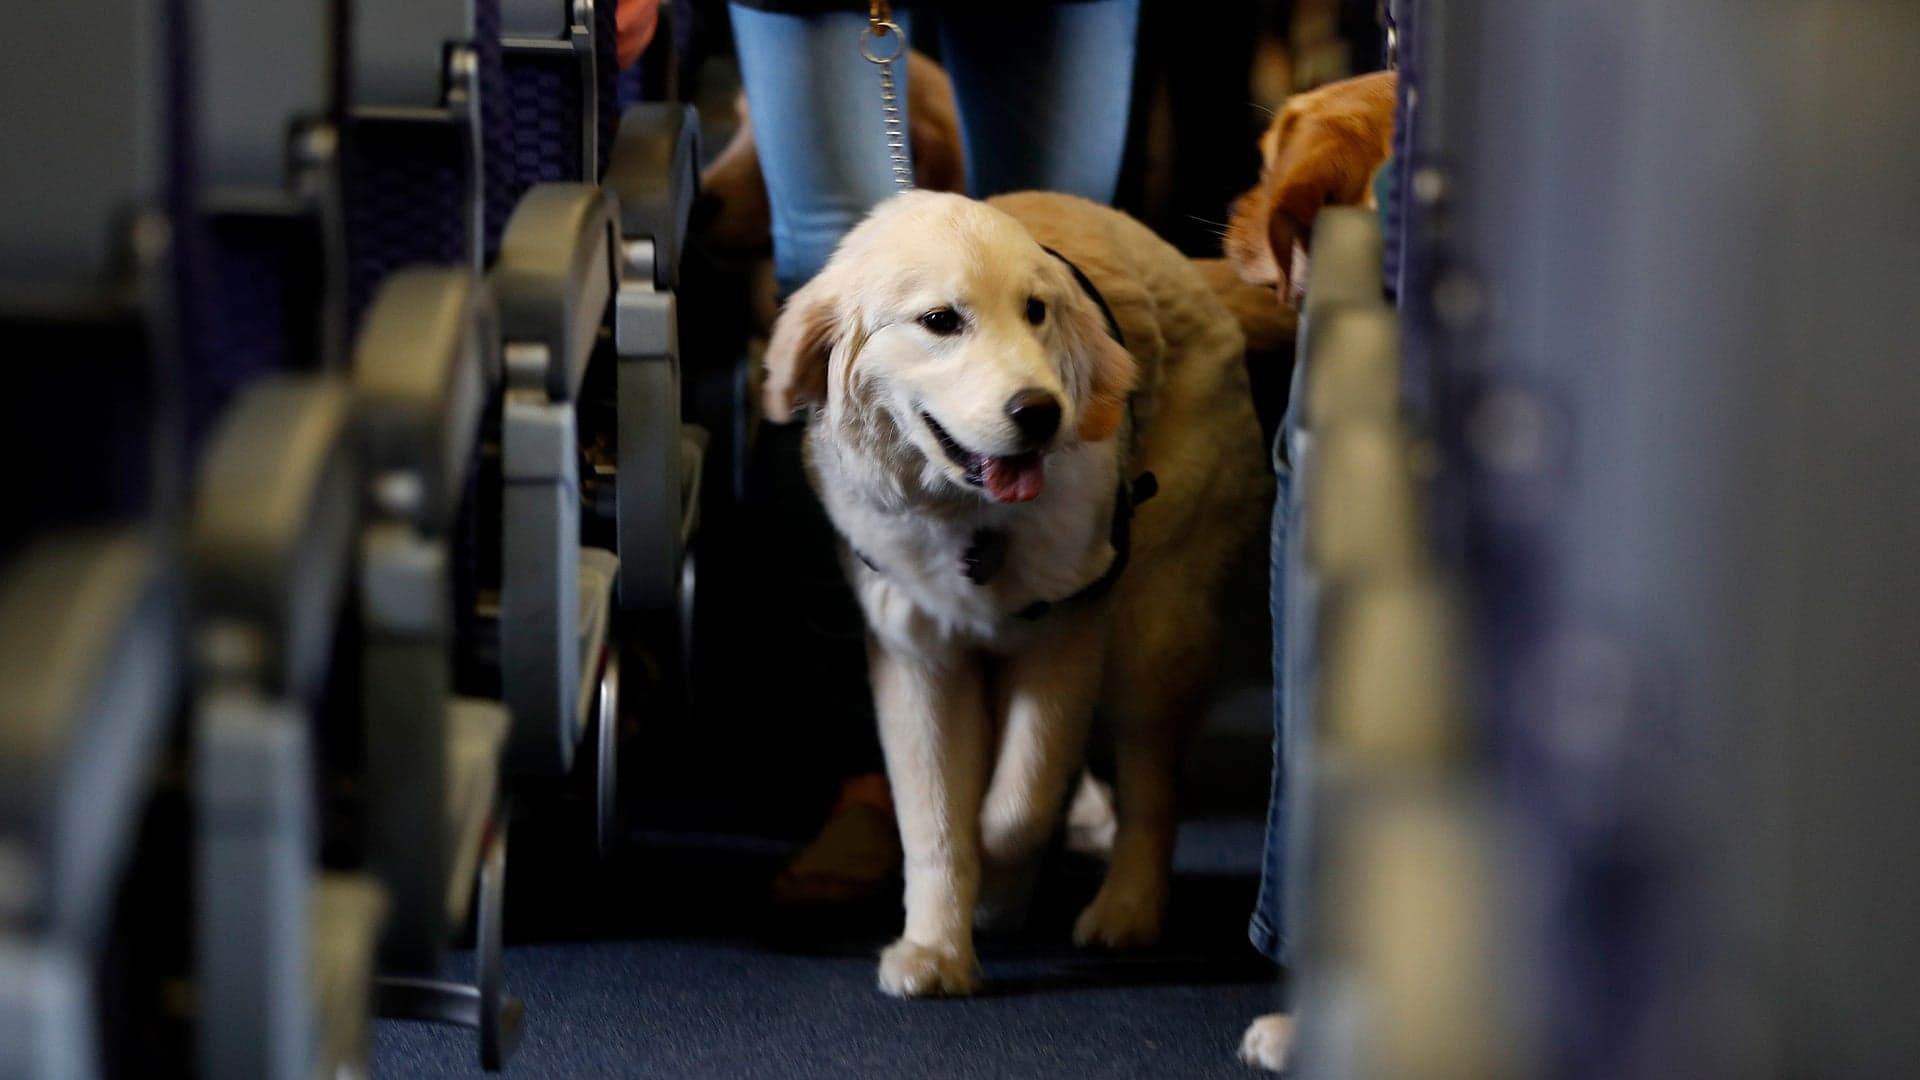 Airlines No Longer Have to Allow Emotional Support Animals on Flights, DOT Rules